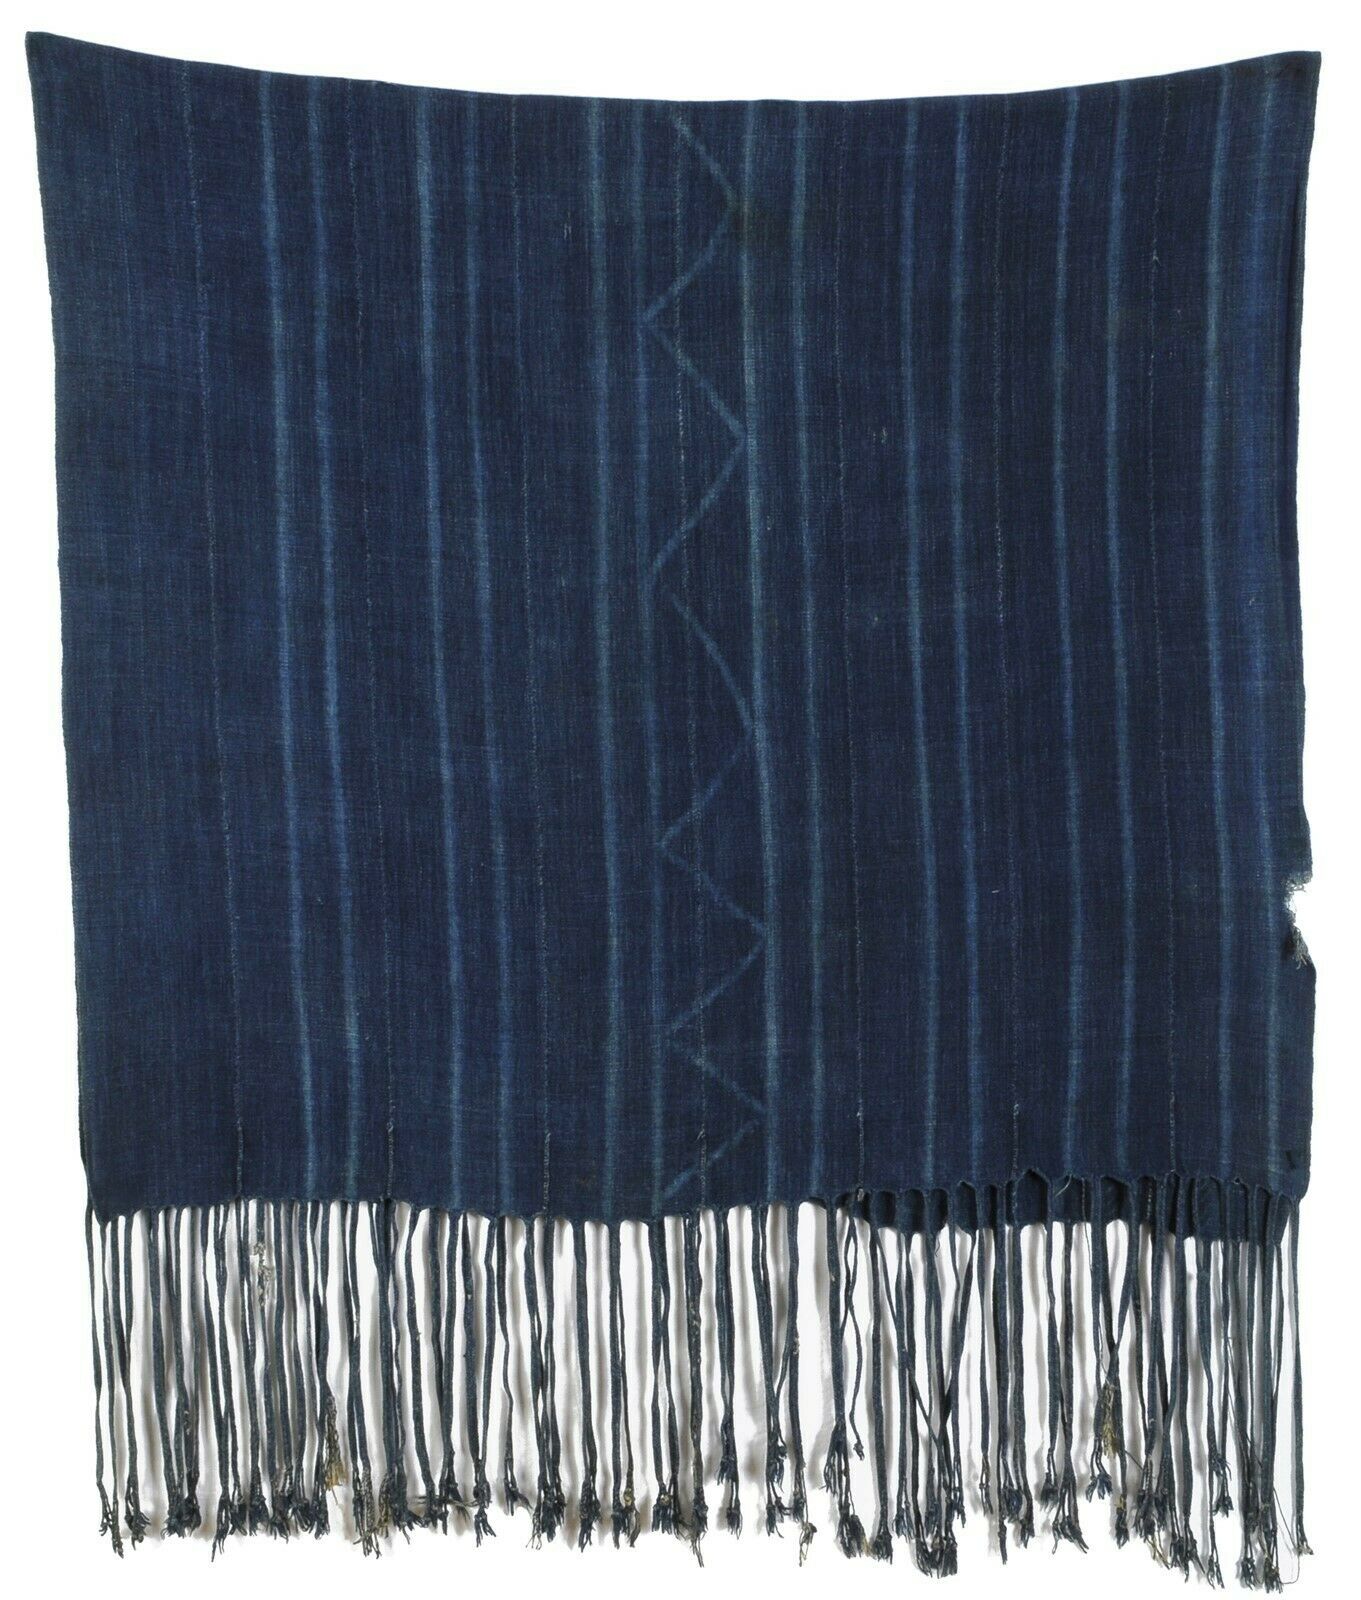 Old African Indigo dyed cotton Mossi Burkina Faso heavy hand woven cloth textile - Tribalgh